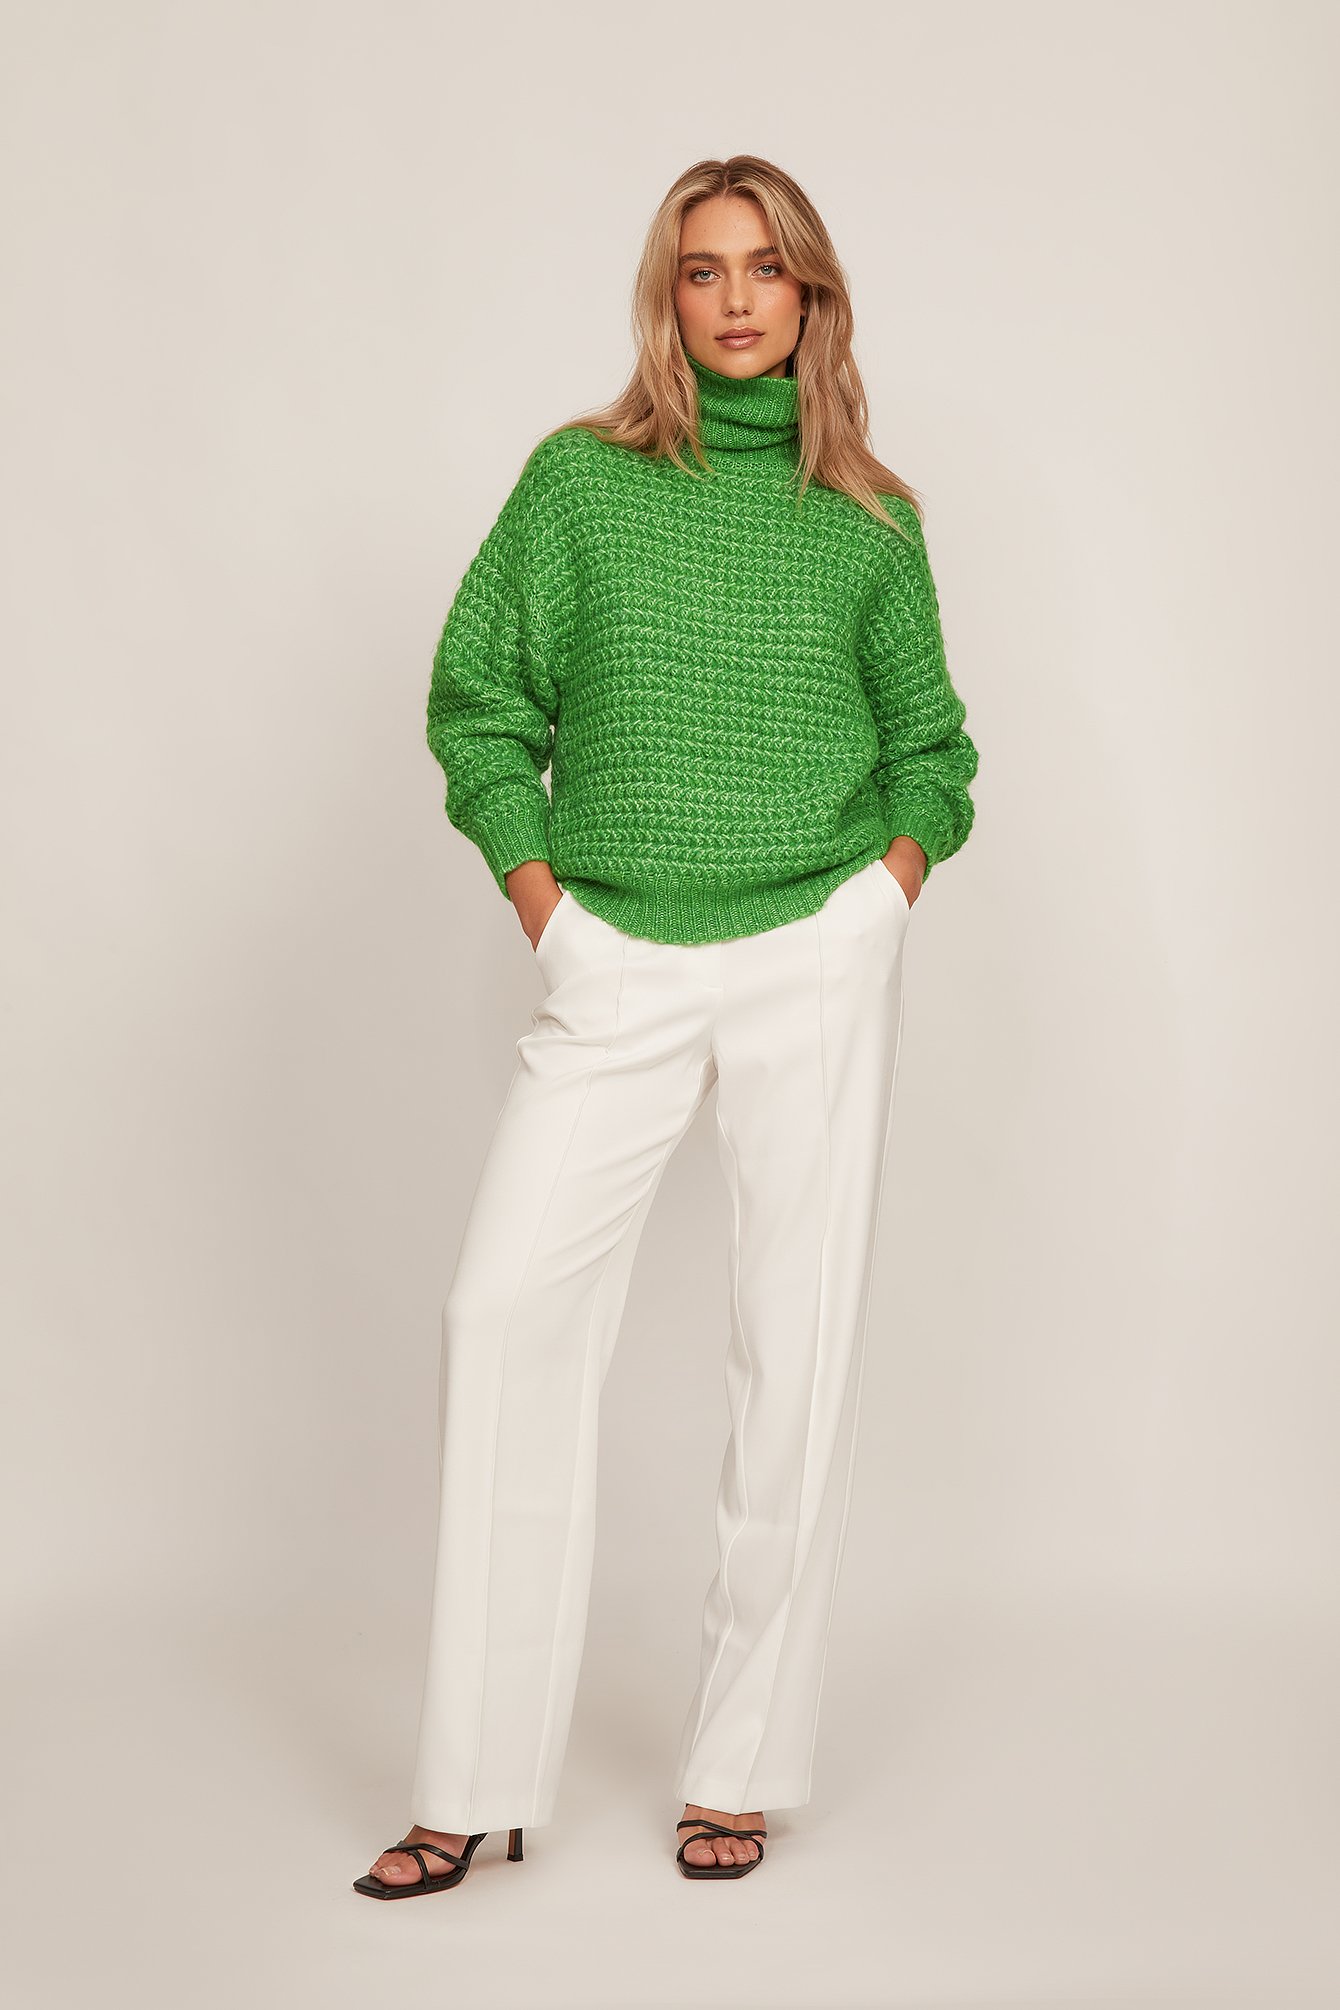 Green High Neck Chunky Knitted Sweater